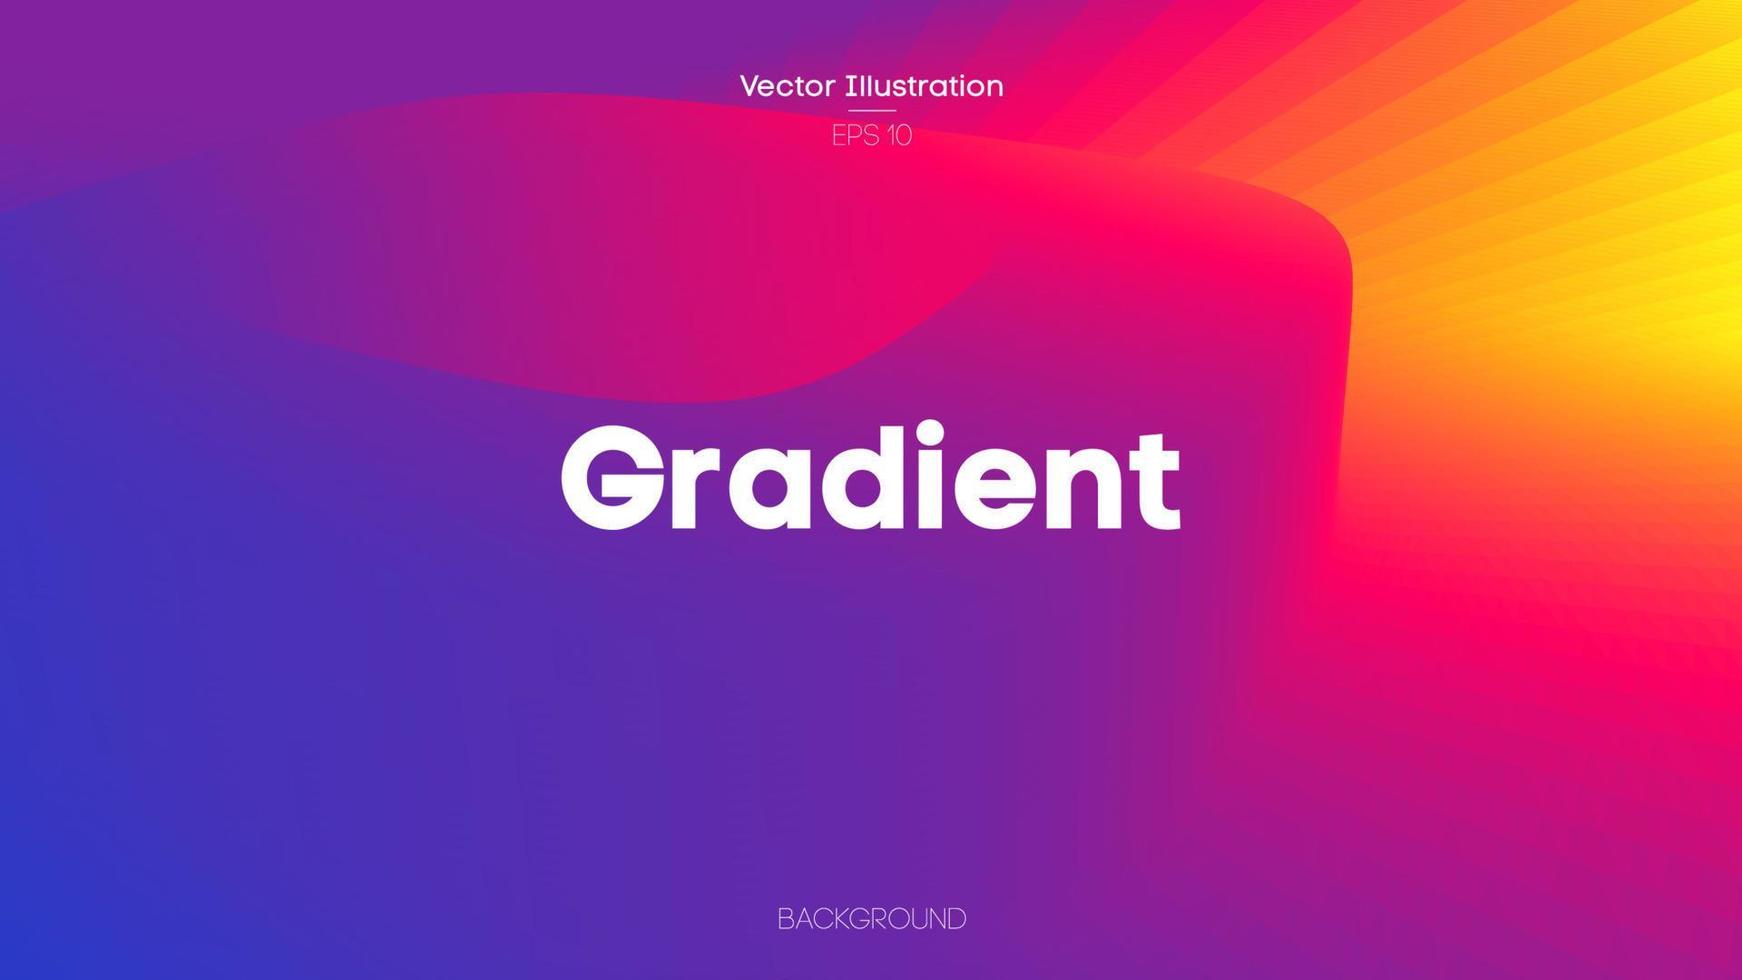 Gradient background color, vector illustration. Abstract background with fluid colors. EPS 10.